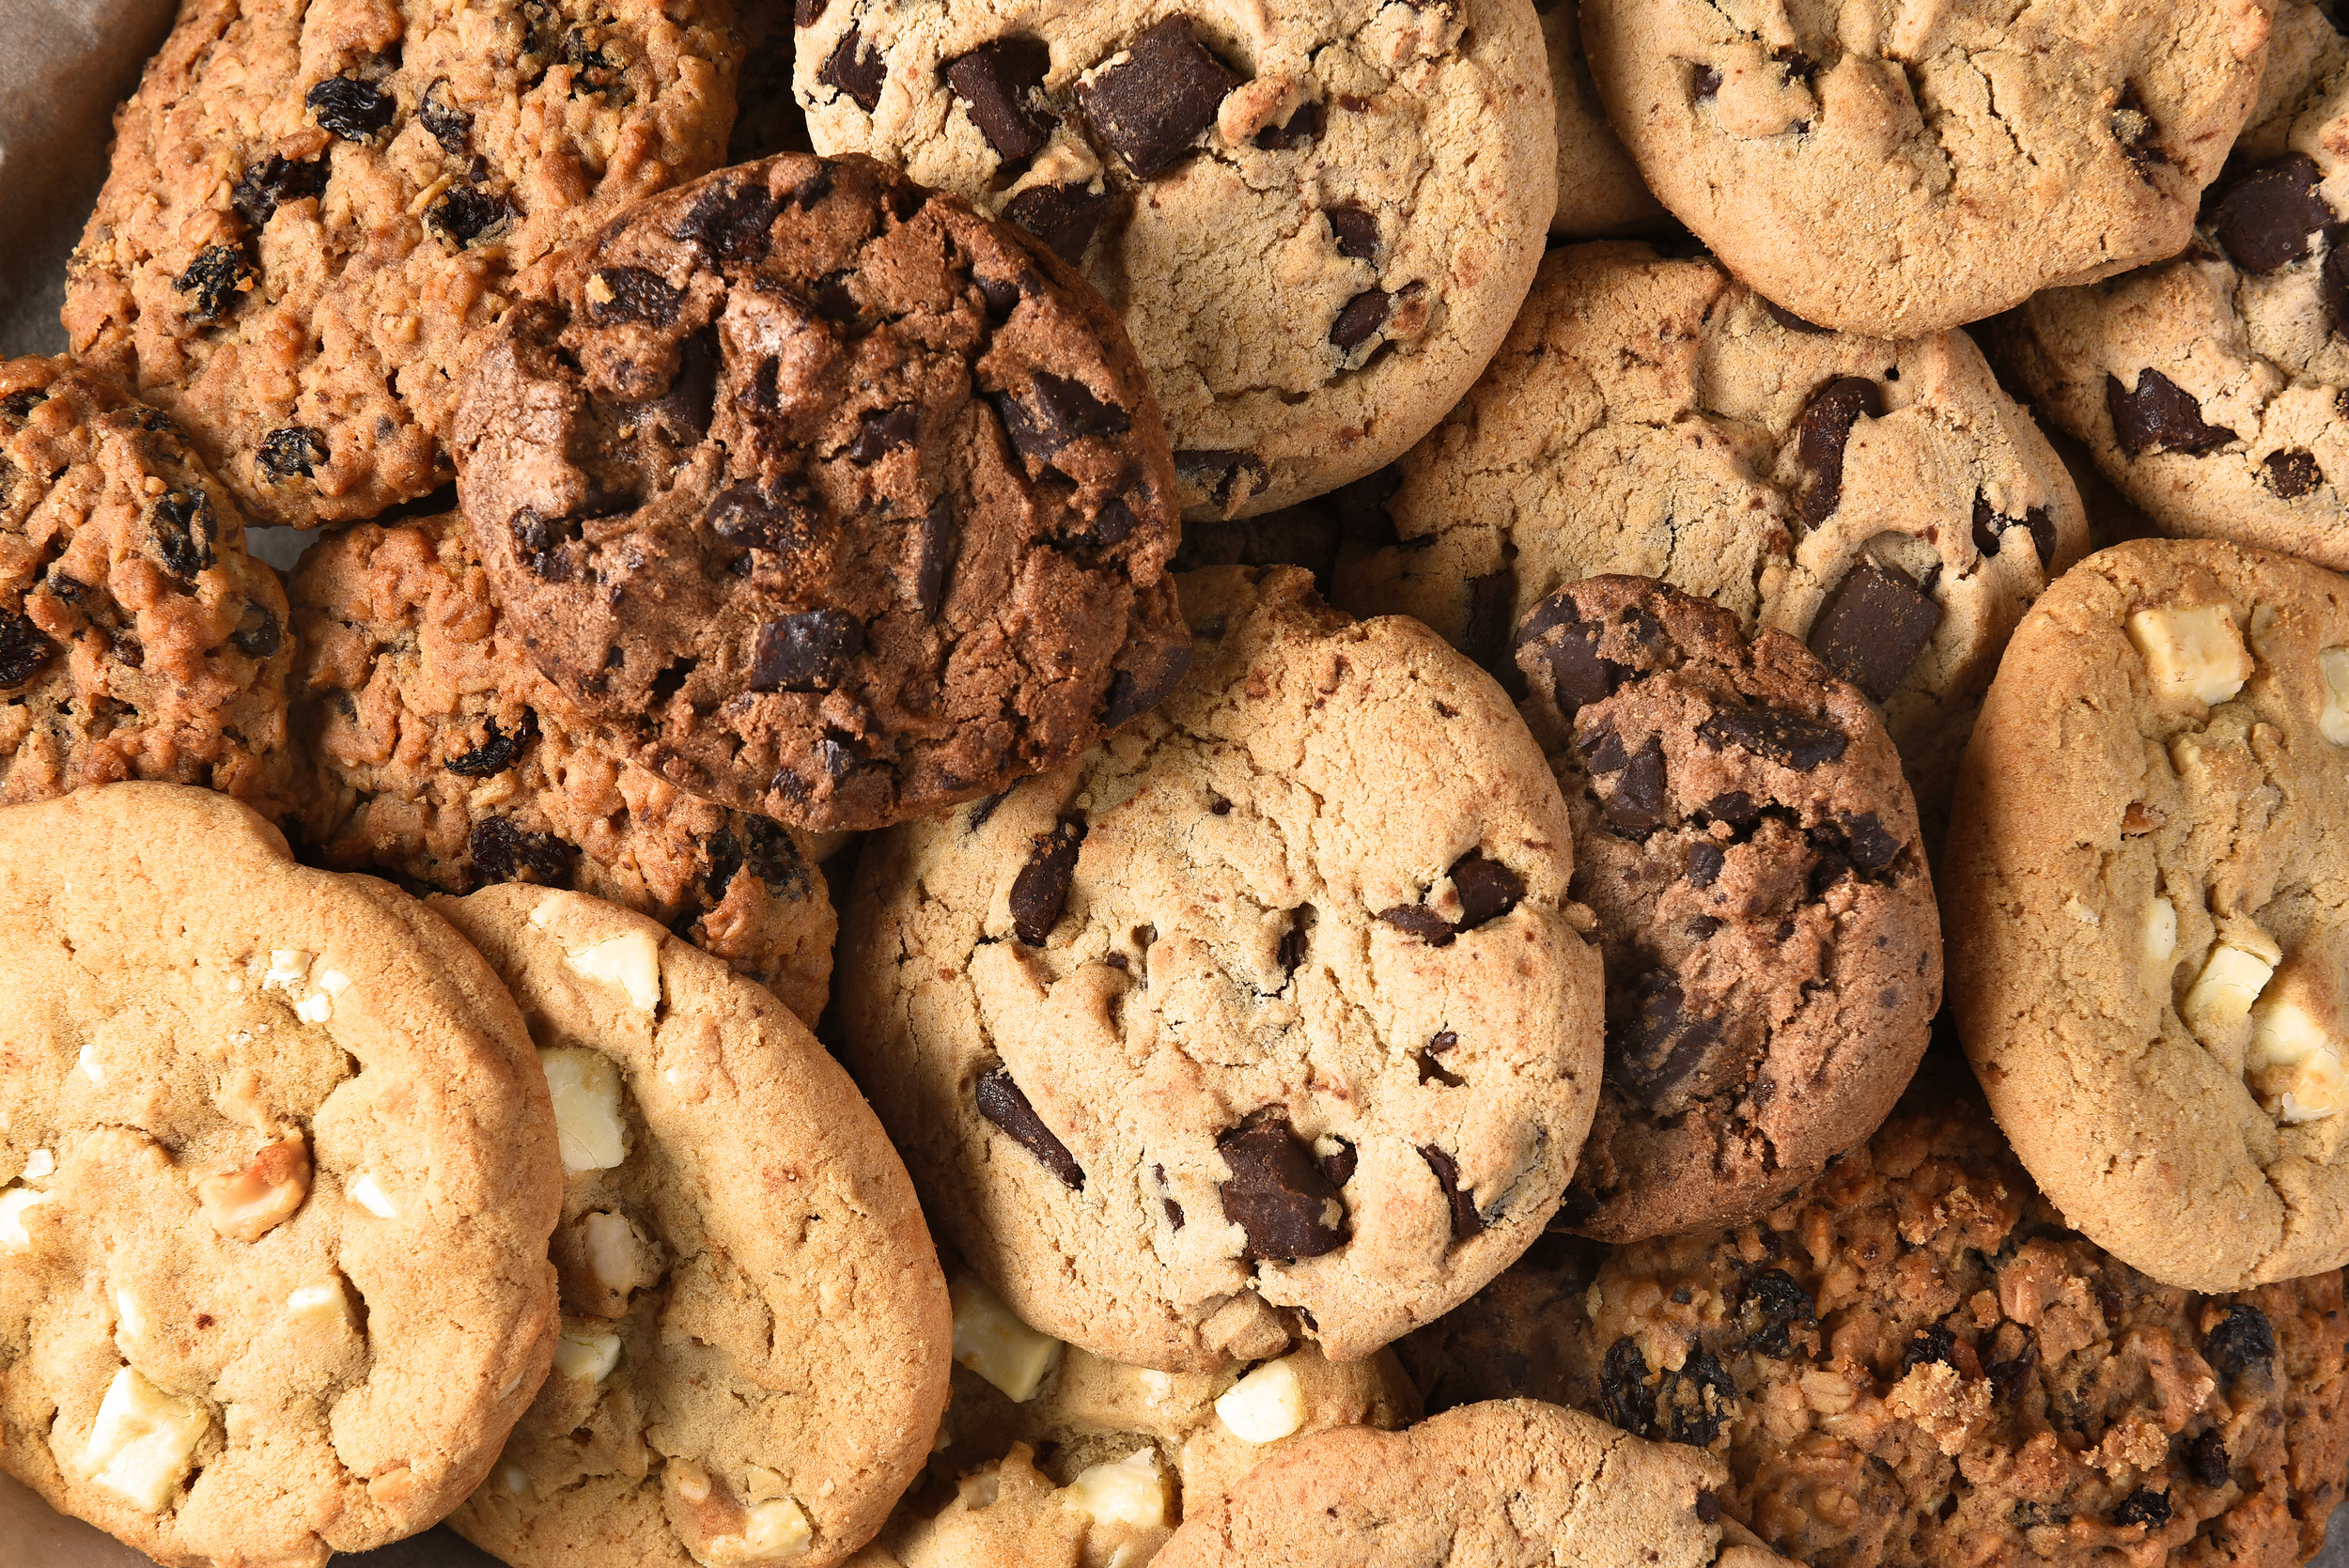 <p>Cookies are essentially small cakes or treats. And cake in Dutch is “koek.” The diminutive form “koekje” (pronounced similarly to the English word) means small cake, now used in English to describe treats known as cookies.</p><p>You may also like: <a href='https://www.yardbarker.com/lifestyle/articles/20_foods_you_didnt_know_you_can_make_on_the_grill_101823/s1__23860369'>20 foods you didn't know you can make on the grill</a></p>